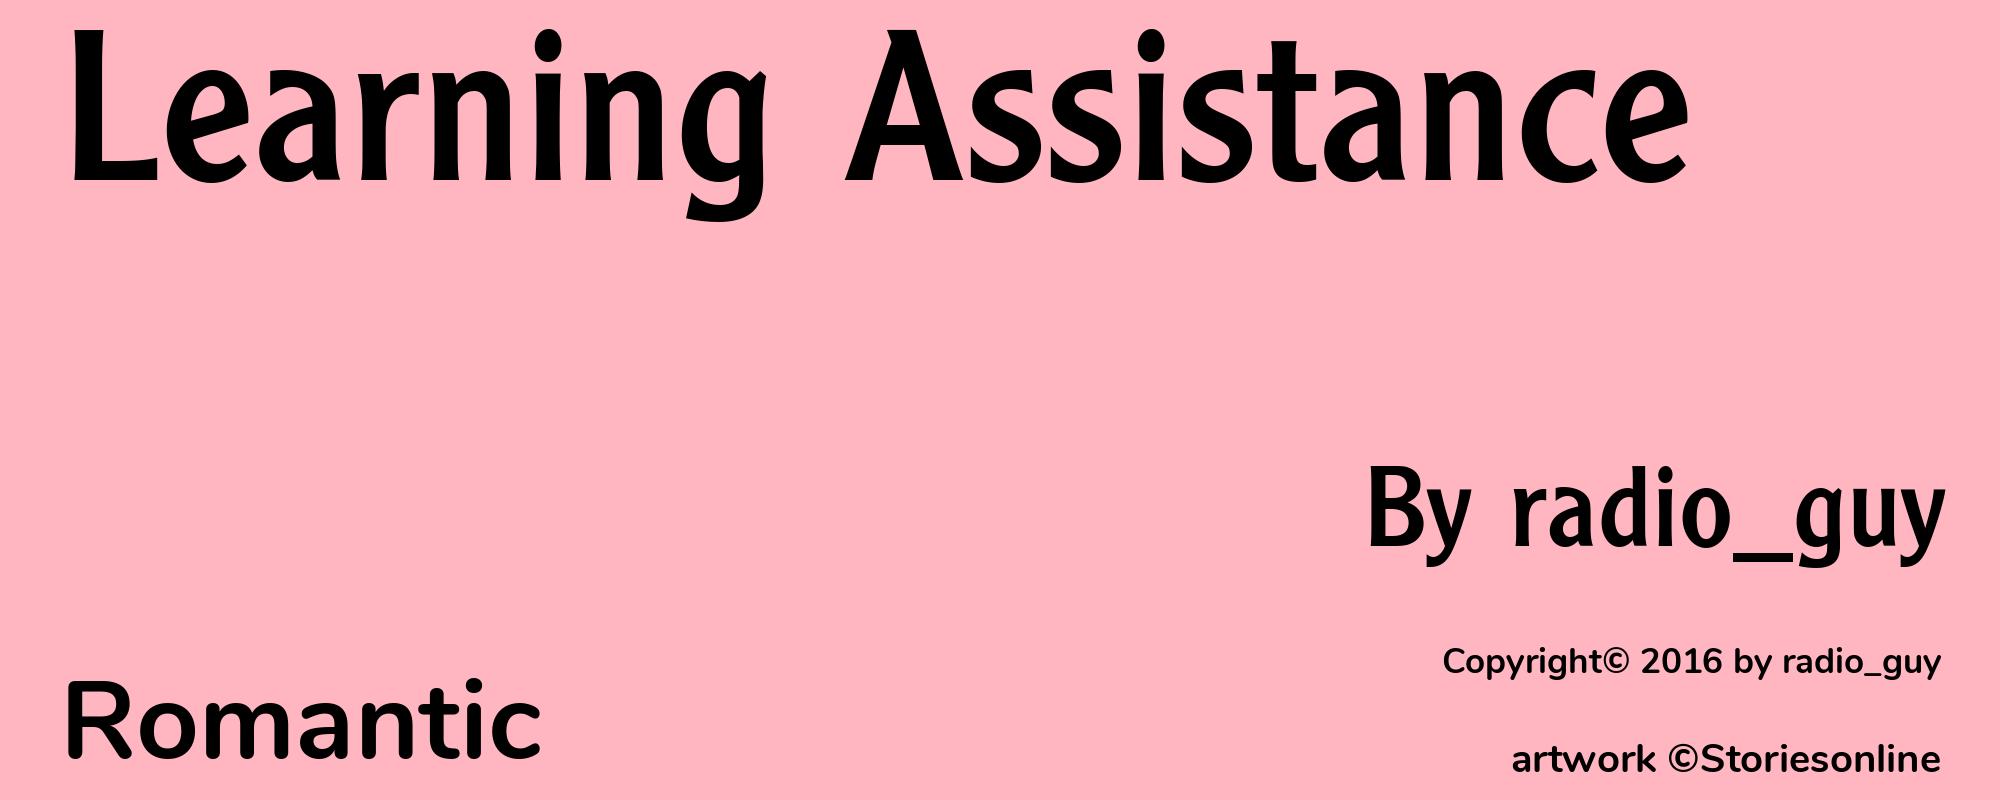 Learning Assistance - Cover